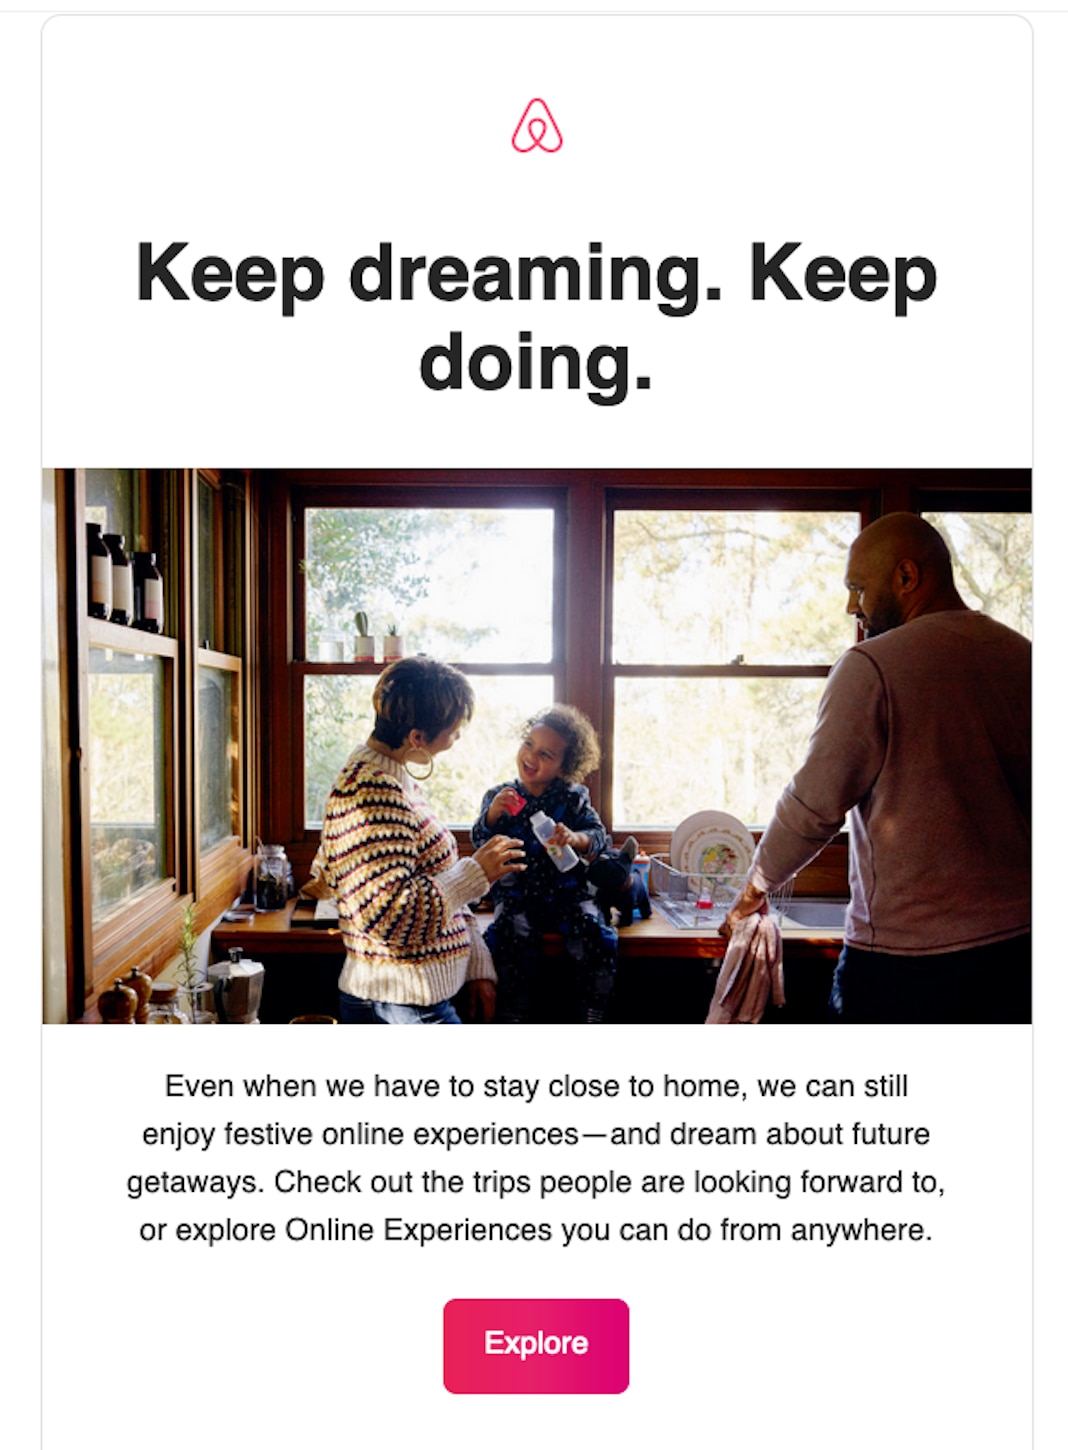 Example of Air Bnb COVID email